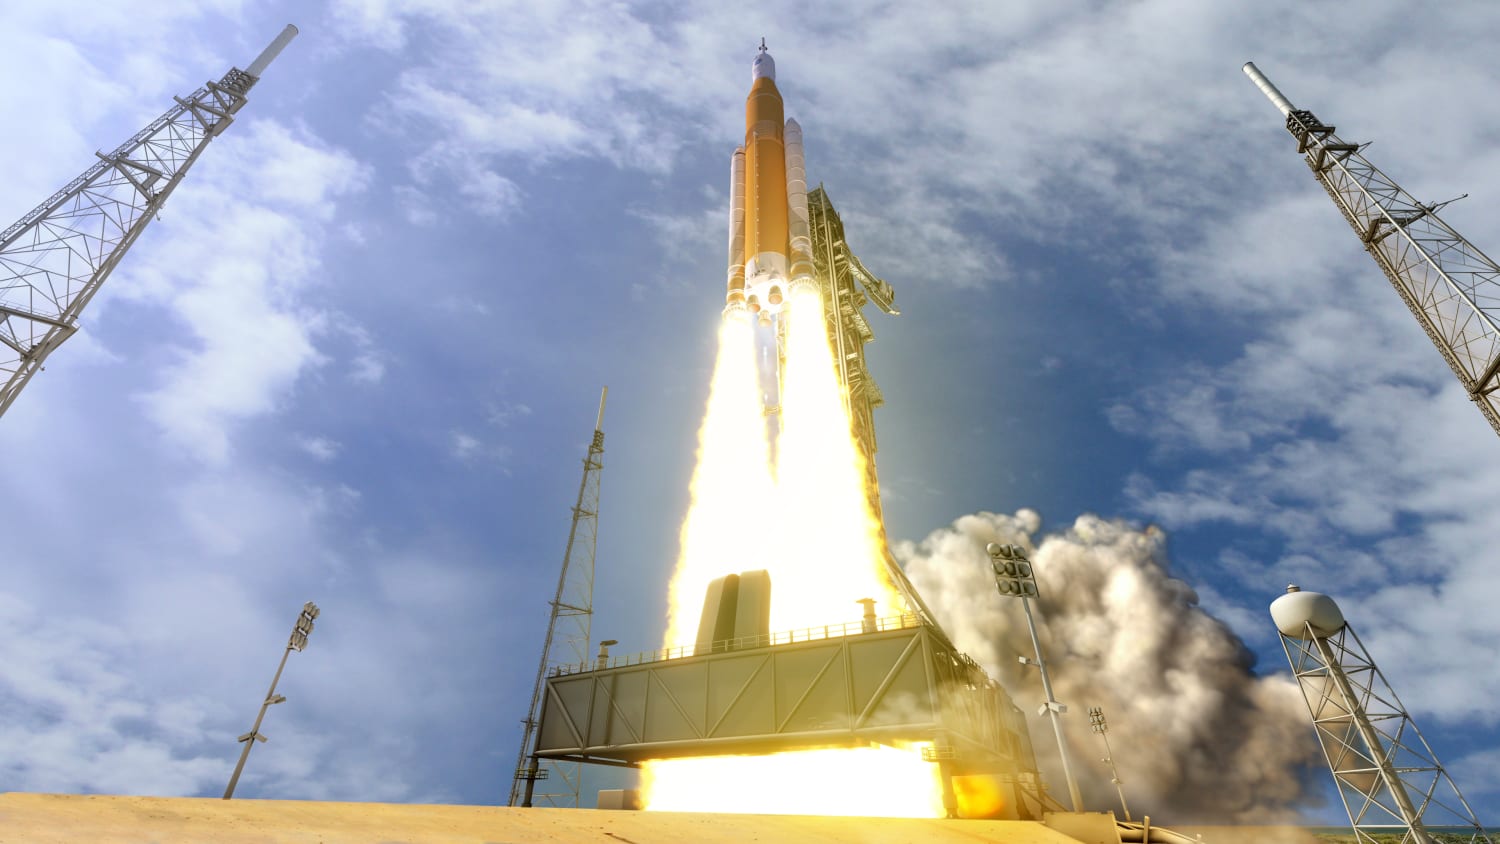 Watch NASA Rocket Launch in Live 360 Video for the First Time Ever | NBC News3840 x 2160